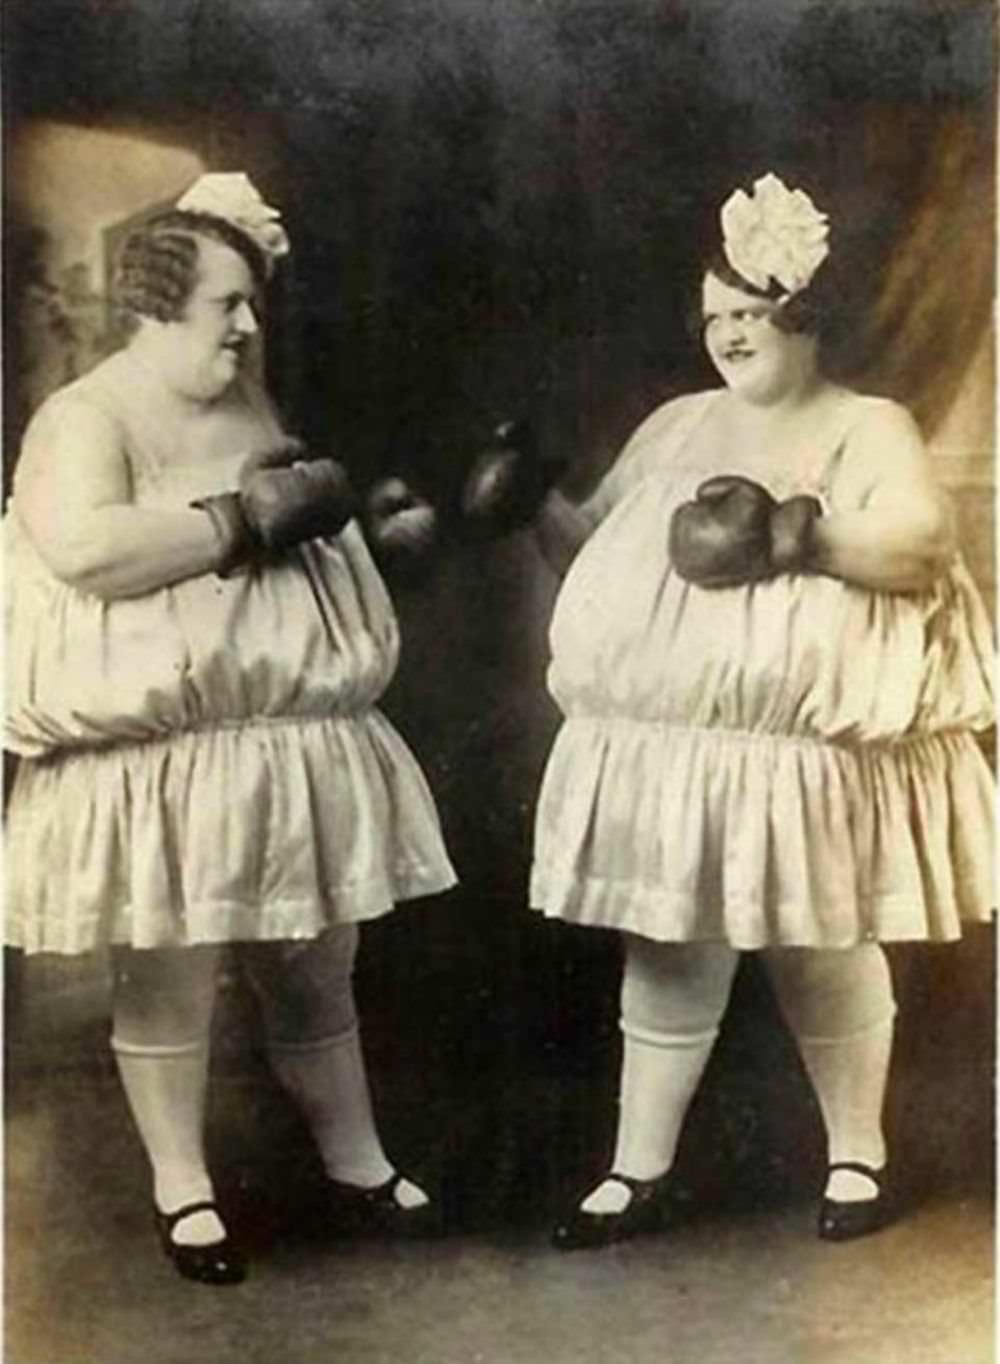 The Carlson sisters, known as the Wrestling Fat Girls, they would put on a boxing match for paying customers, circa 1925.